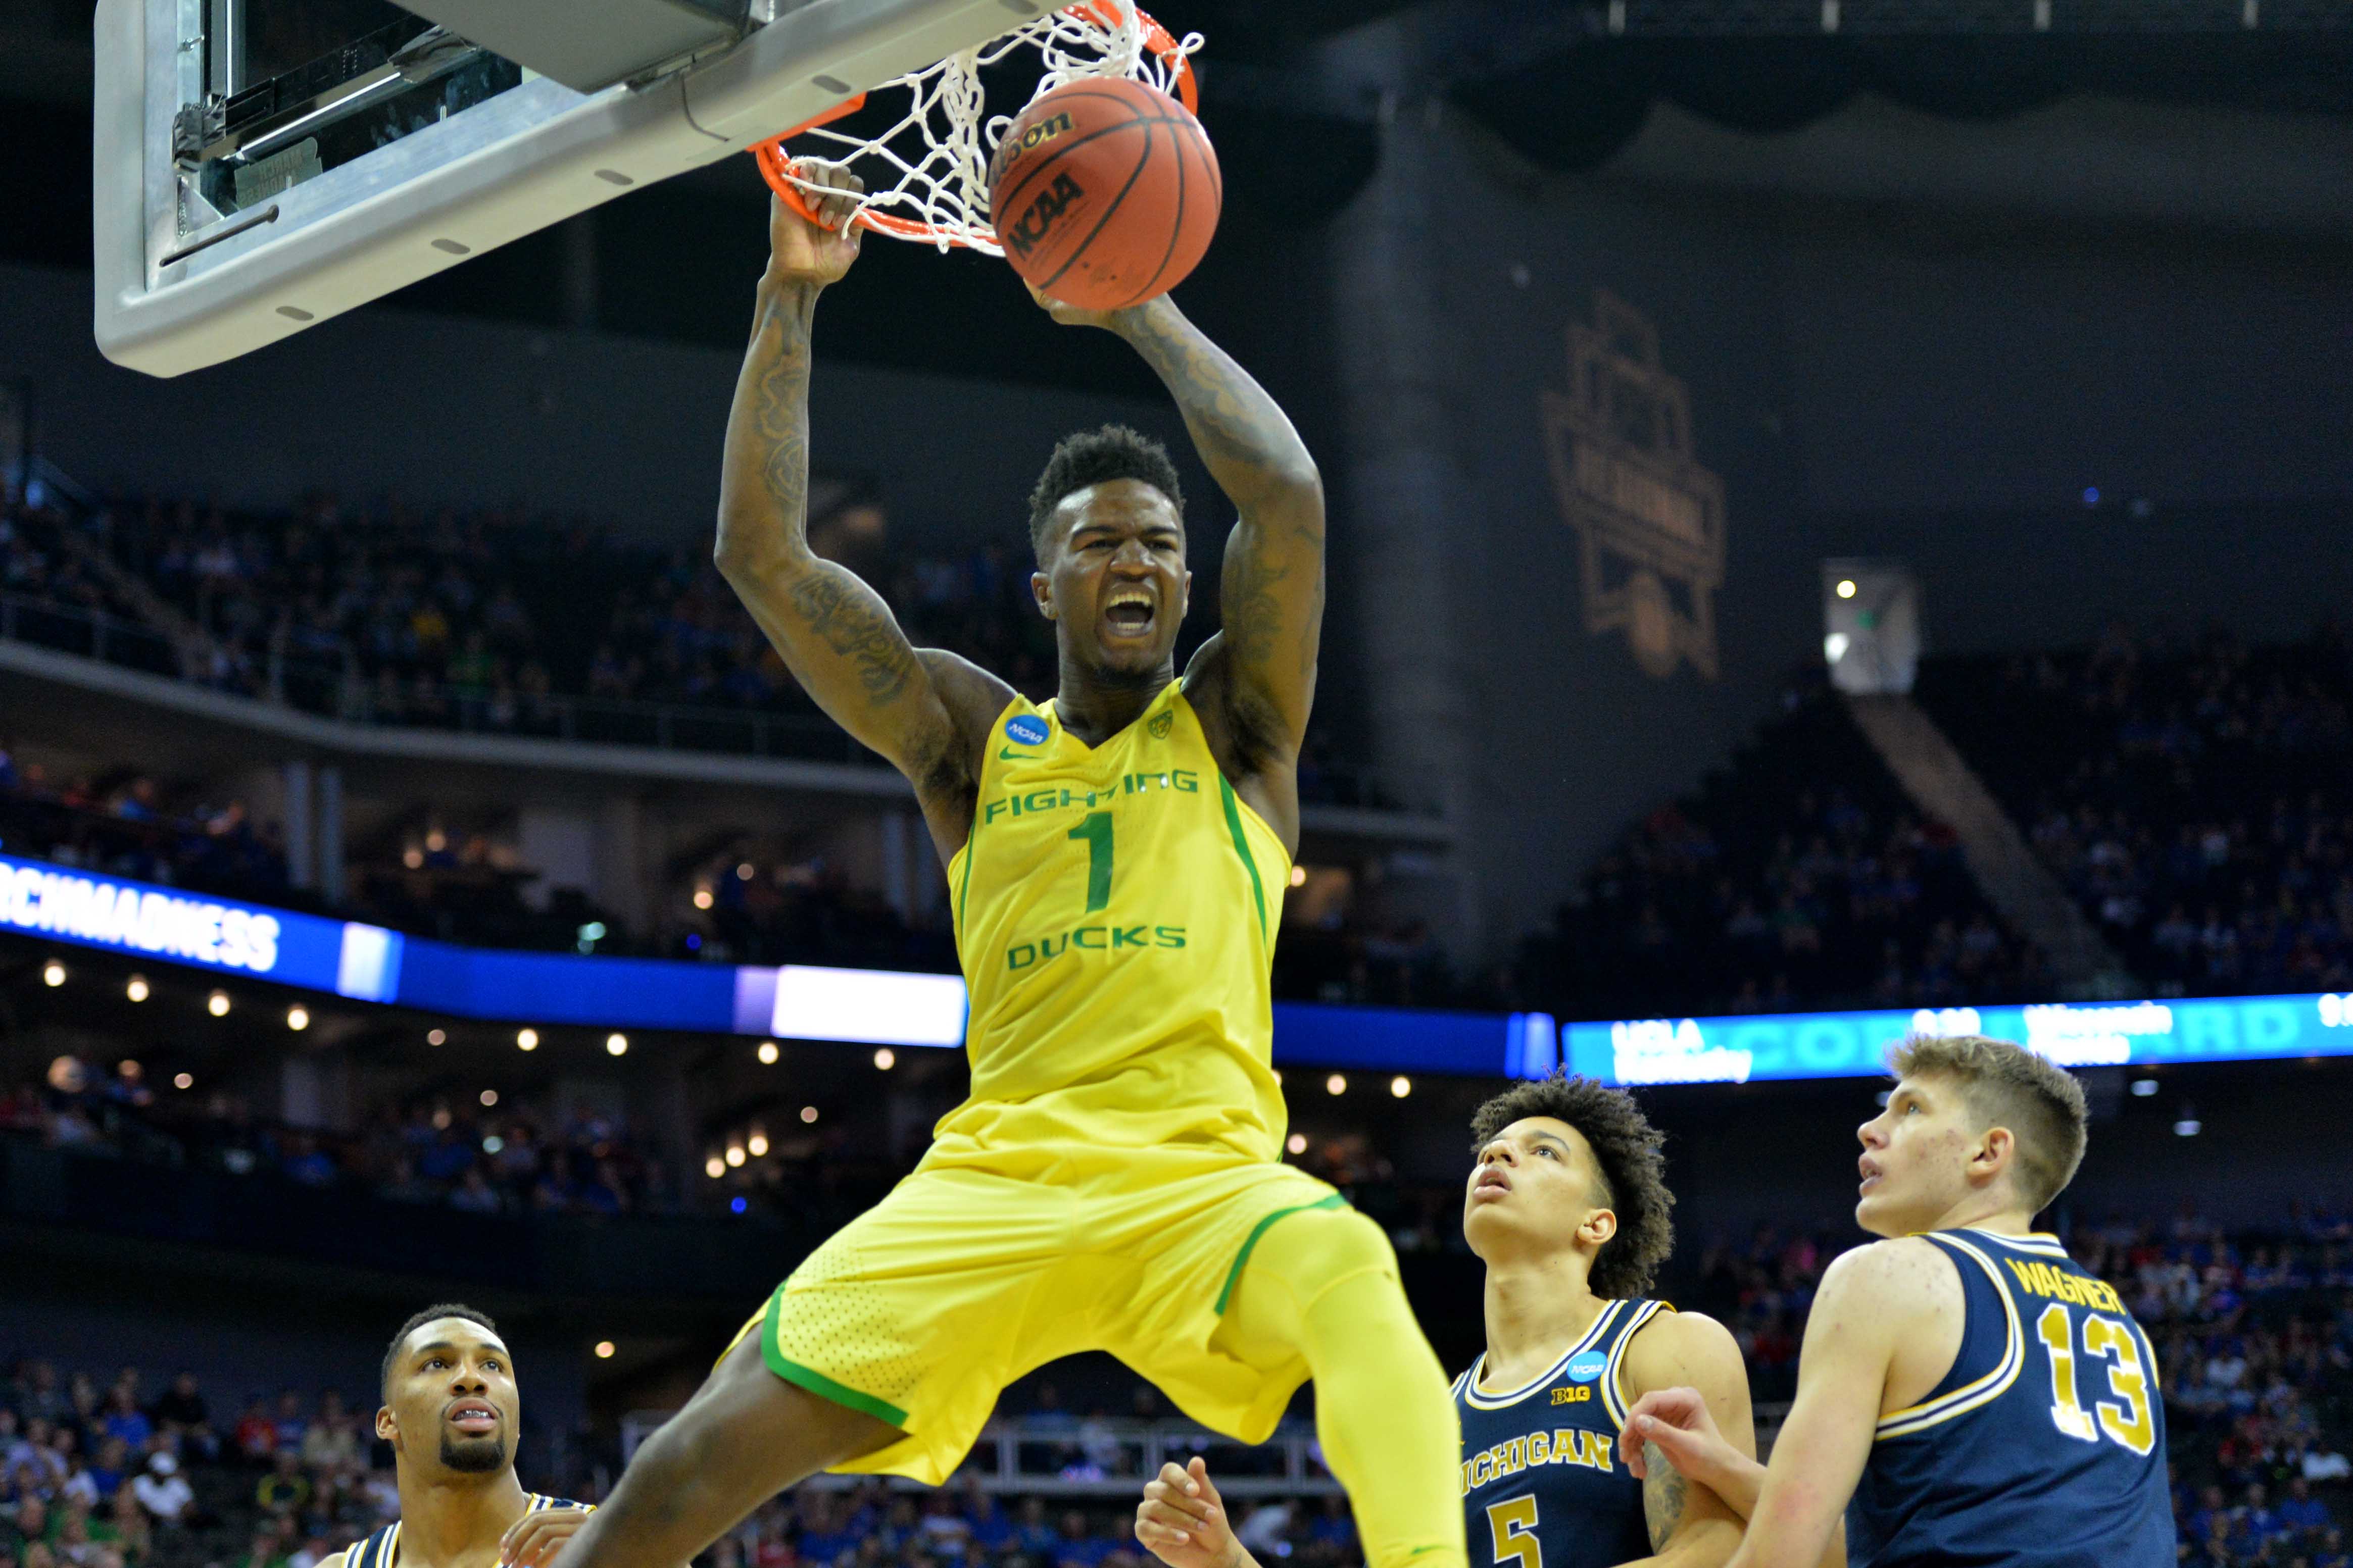 Mar 23, 2017; Kansas City, MO, USA; Oregon Ducks forward Jordan Bell (1) dunks ahead of Michigan Wolverines forward D.J. Wilson (5) and forward Moritz Wagner (13) during the first half in the semifinals of the midwest Regional of the 2017 NCAA Tournament at Sprint Center. Mandatory Credit: Denny Medley-USA TODAY Sports